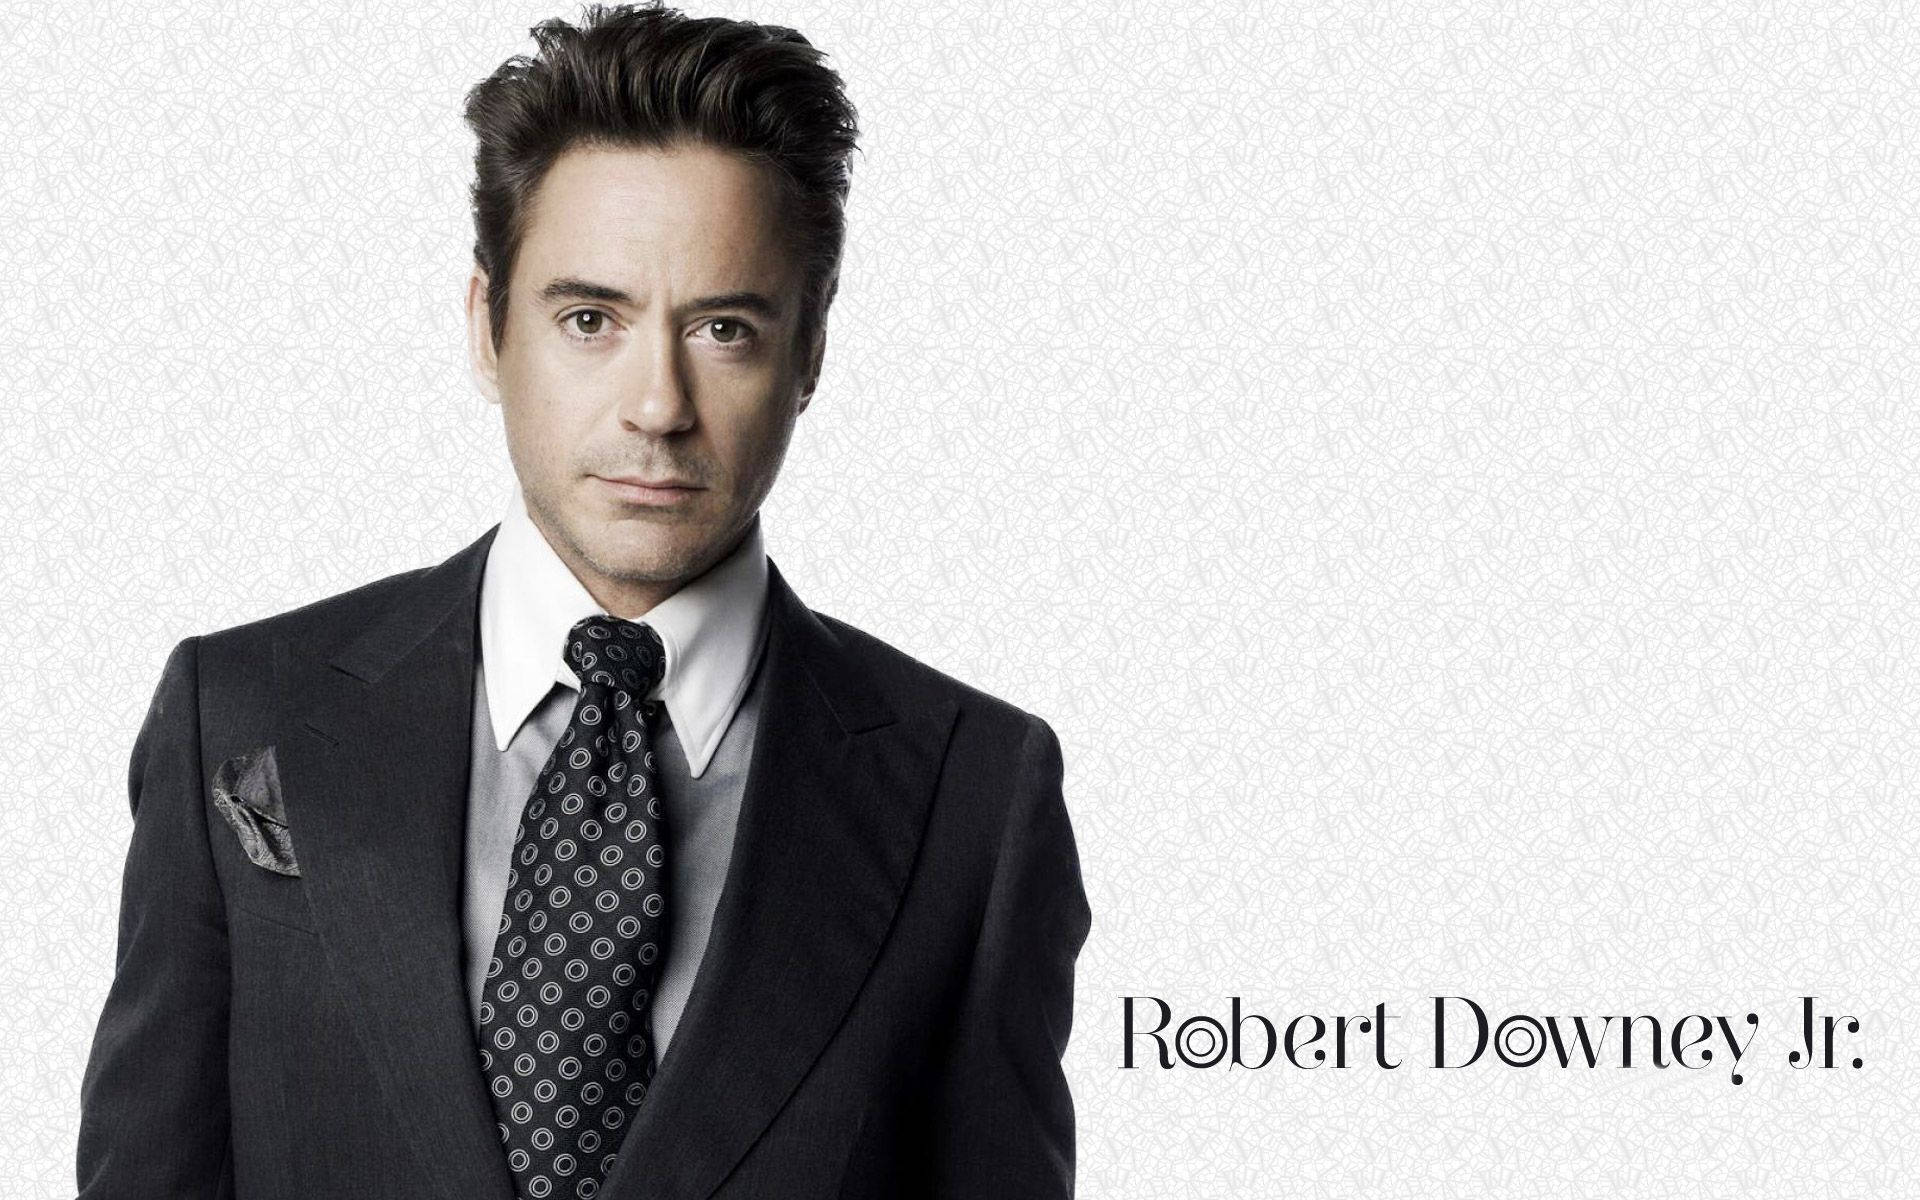 Young Robert Downey Jr. Well Dressed Background